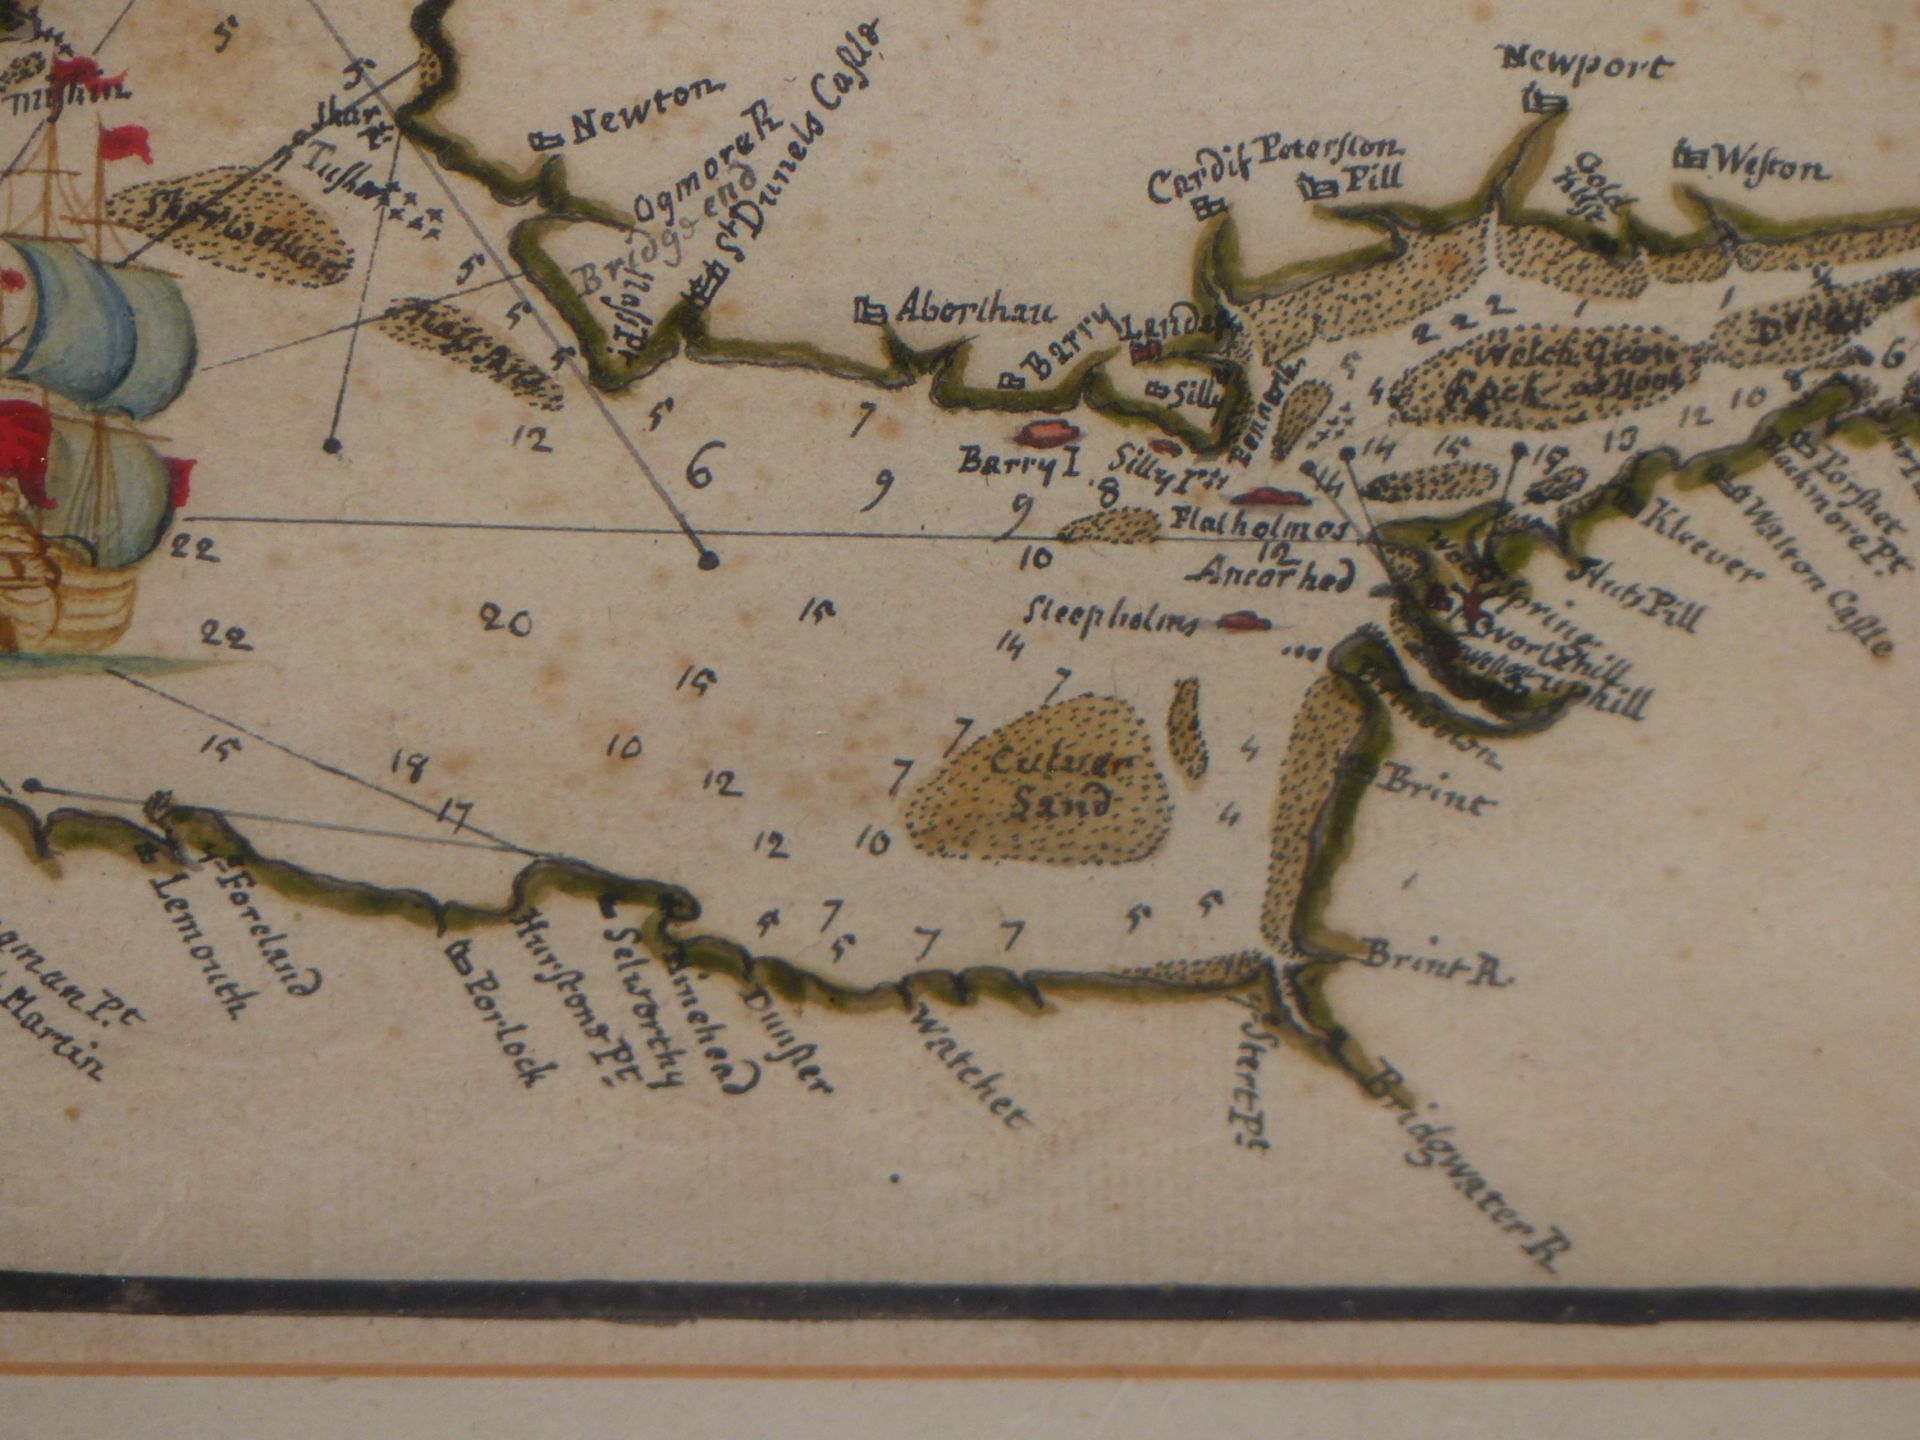 G. WOOD (CARTOGRAPHER) 18TH CENTURY ENGLISH. A DRAUGHT(SIC) OF THE BRISTOL CHANNEL EXACTLY - Image 3 of 9